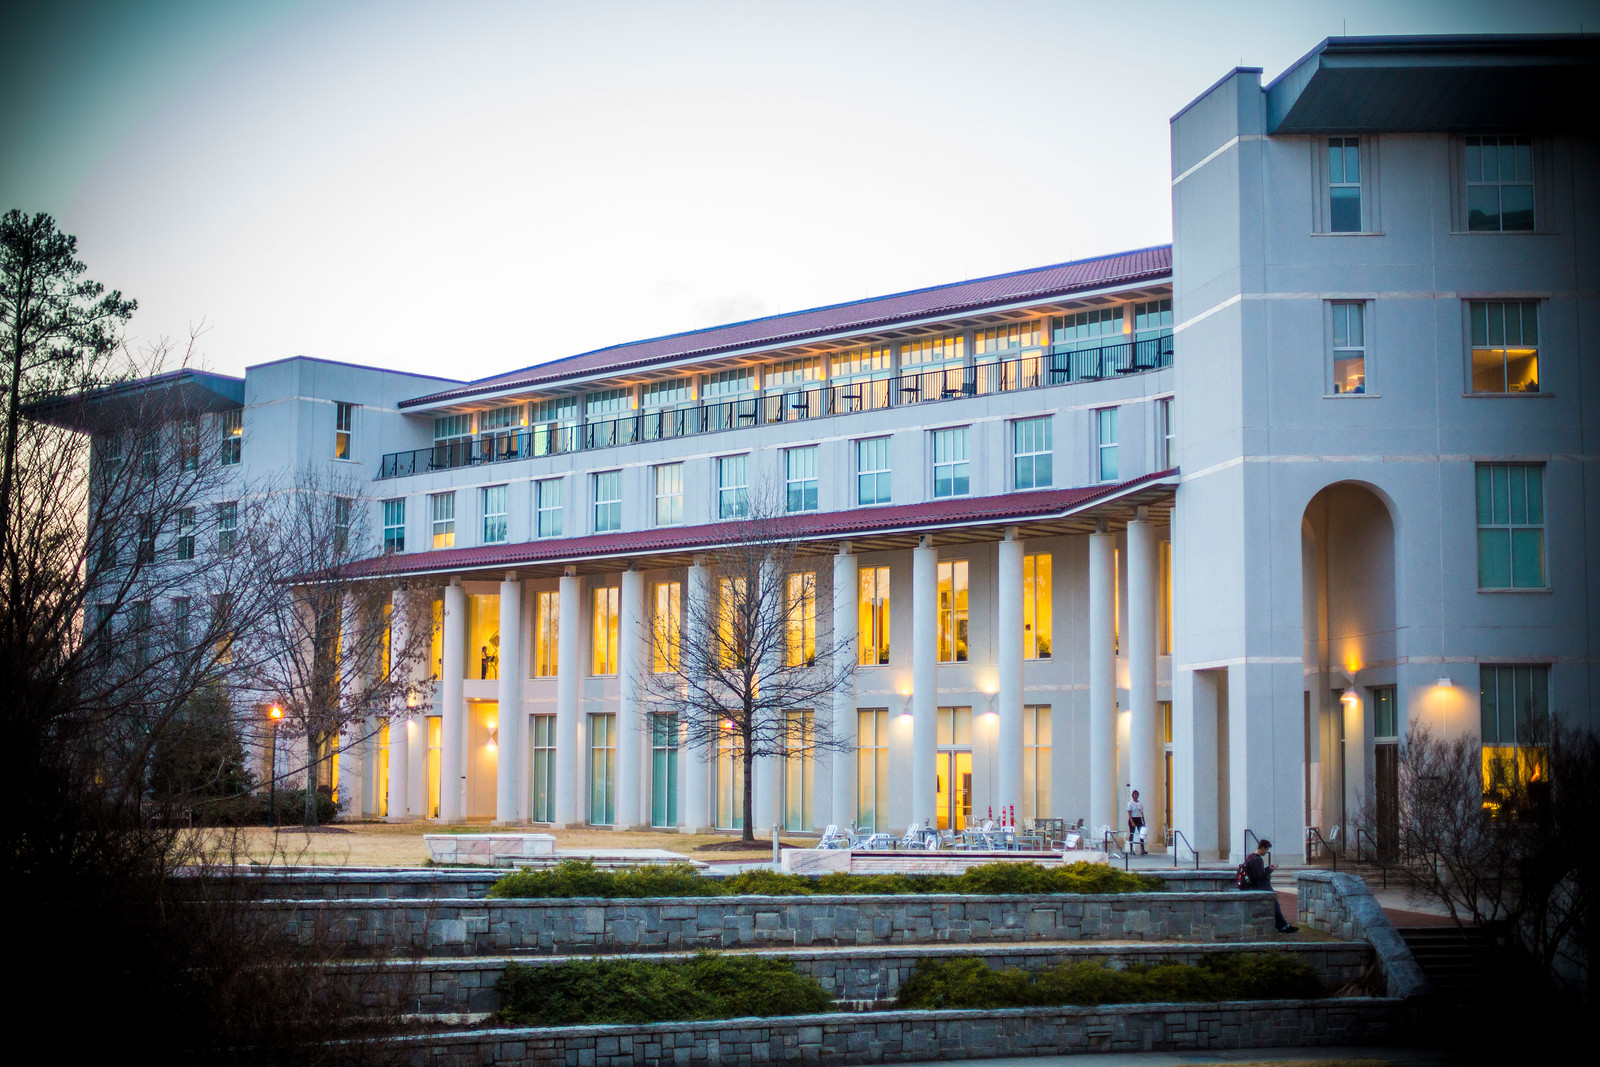 Executive MBA program among best in U.S. in Financial Times ranking